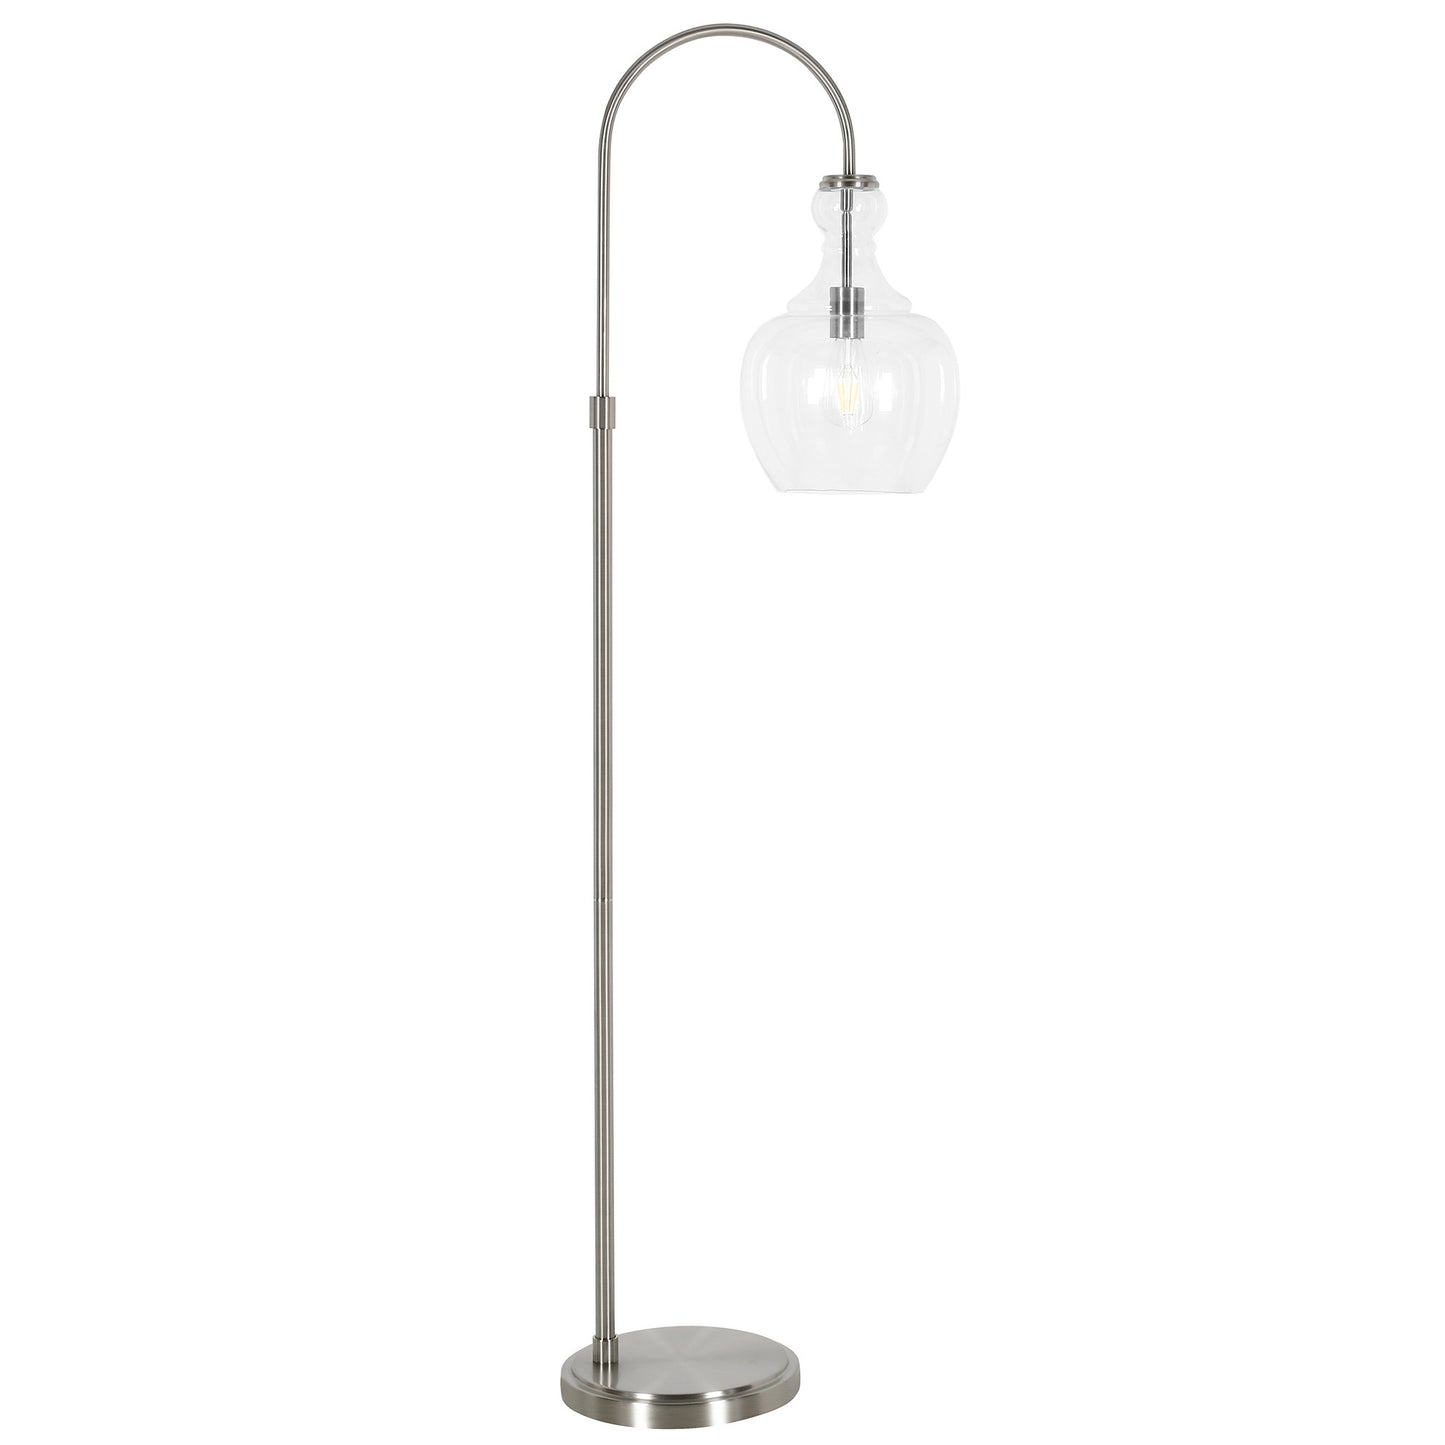 70" Nickel Arched Floor Lamp With Clear Transparent Glass Dome Shade